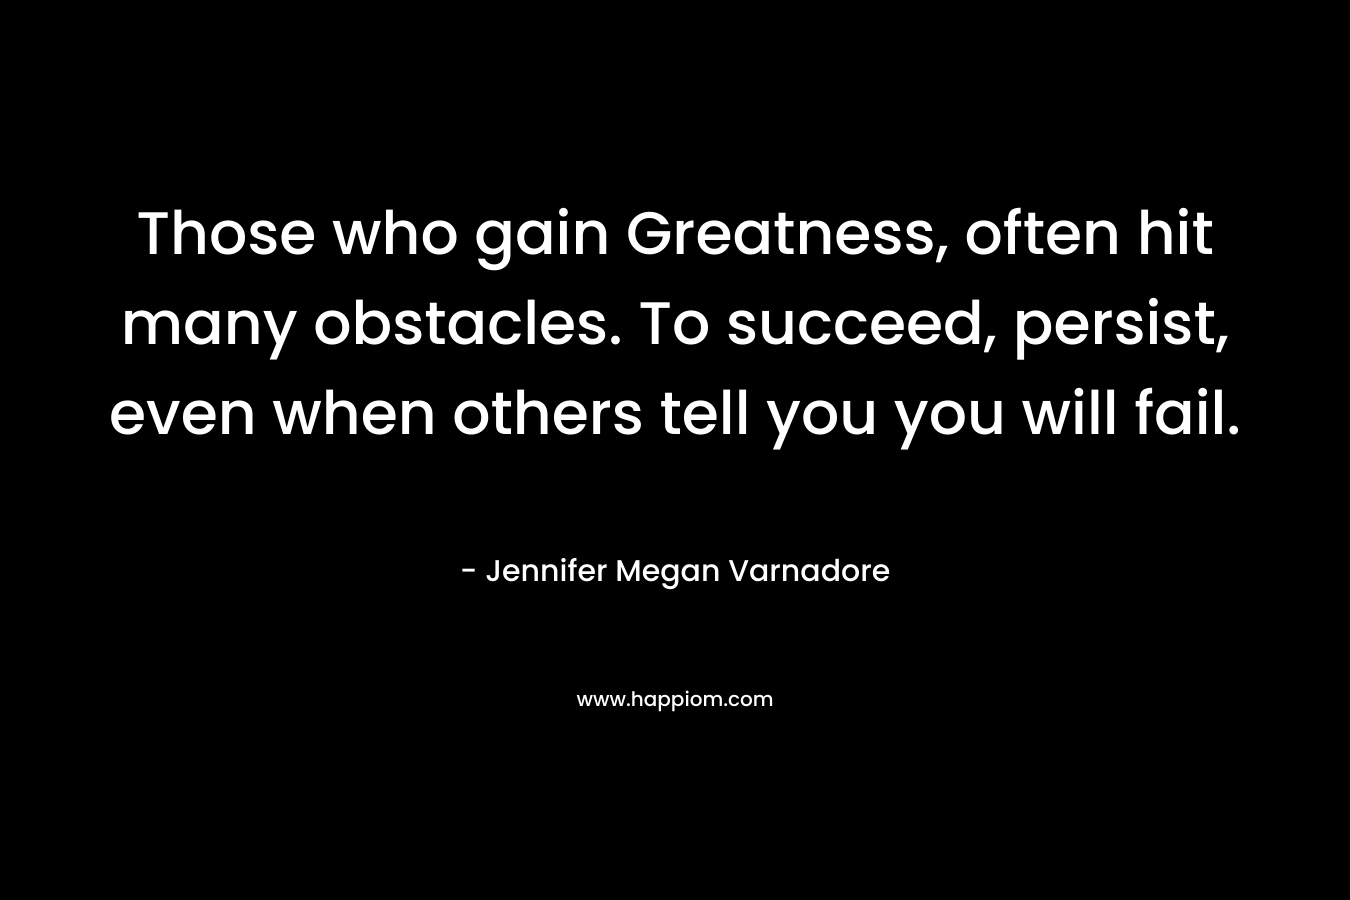 Those who gain Greatness, often hit many obstacles. To succeed, persist, even when others tell you you will fail. – Jennifer Megan Varnadore